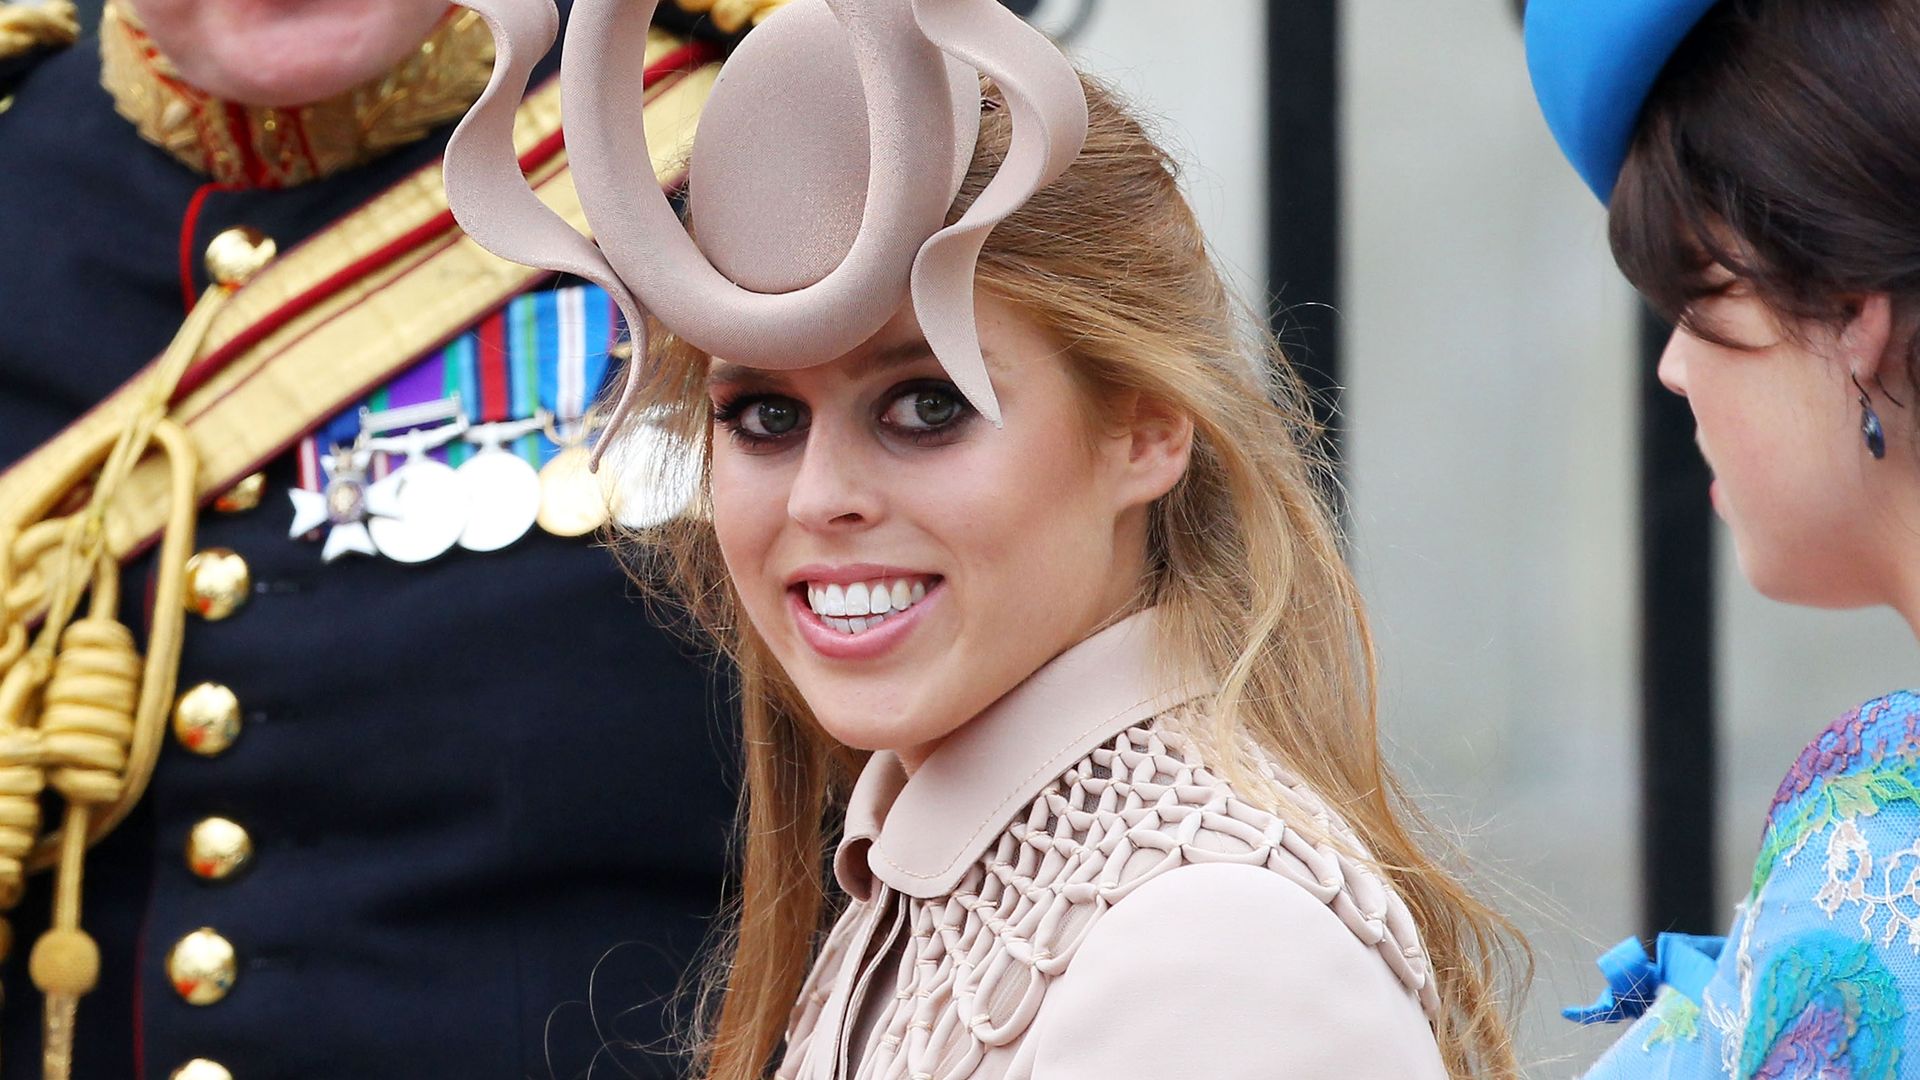 Princess Beatrice of York in a nude dress and fascinator at Prince William's royal wedding